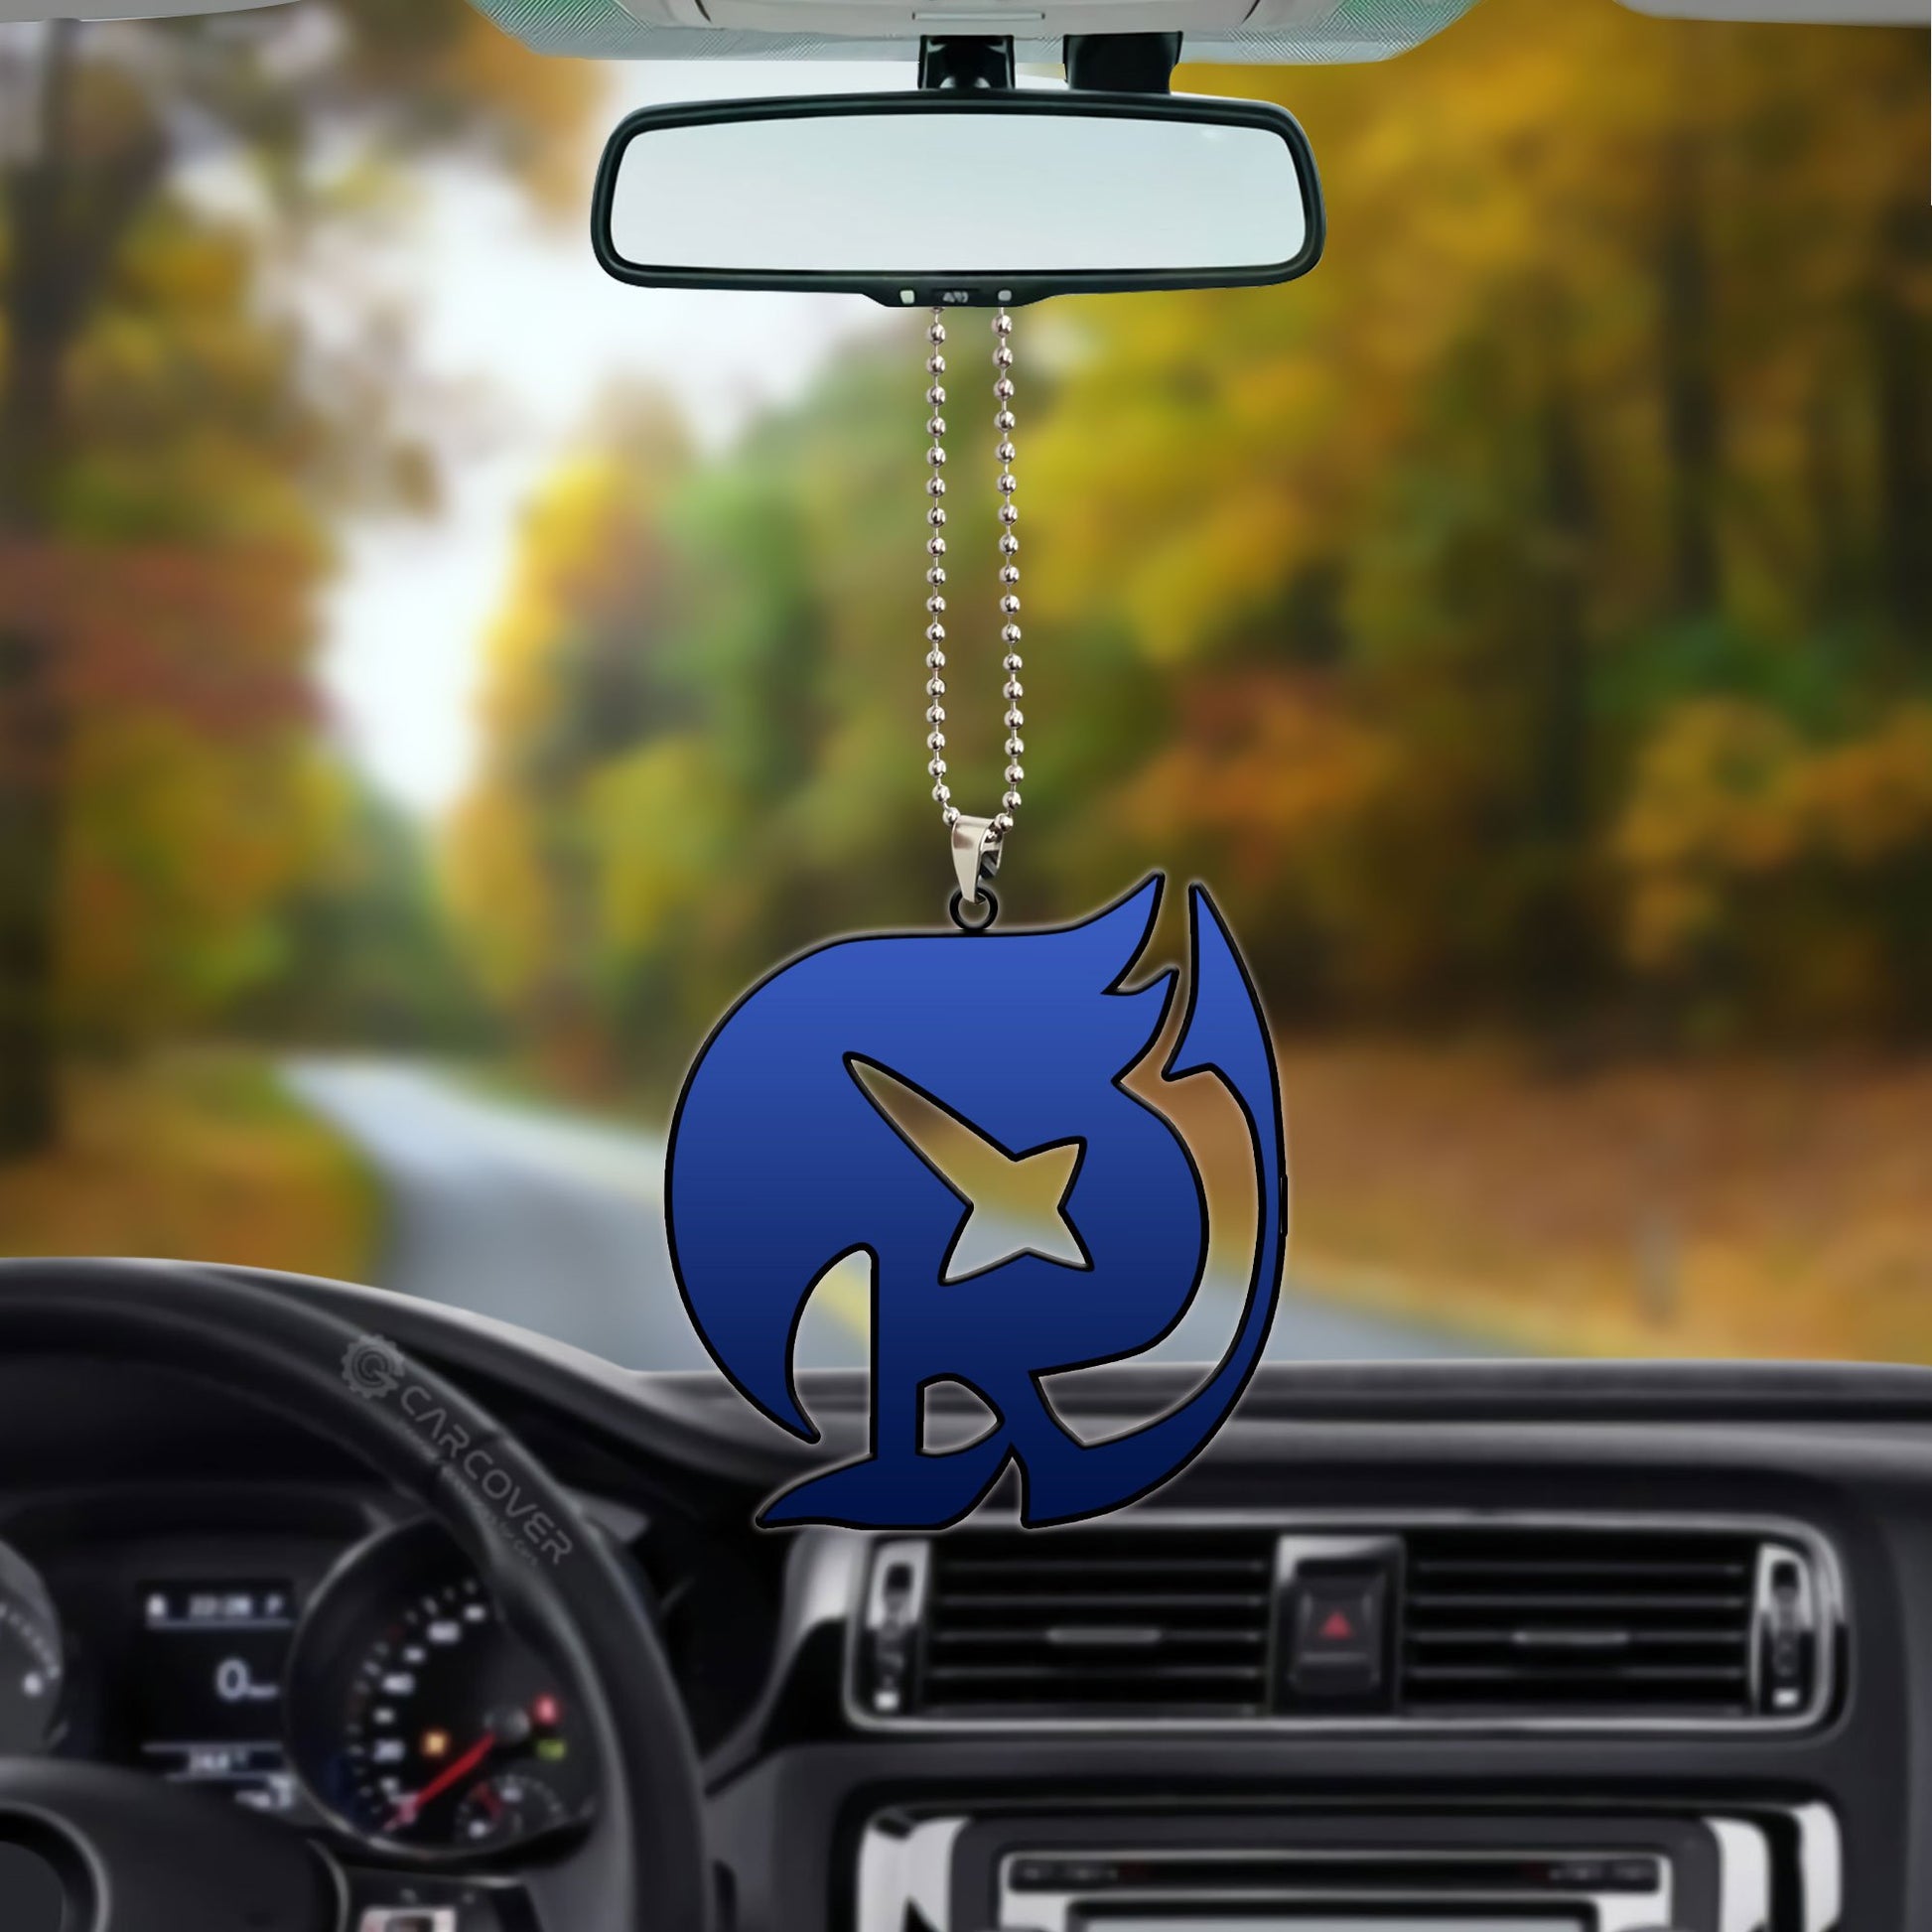 Blue Raven Tail Symbol Ornament Custom Fairy Tail Anime Car Interior Accessories - Gearcarcover - 3